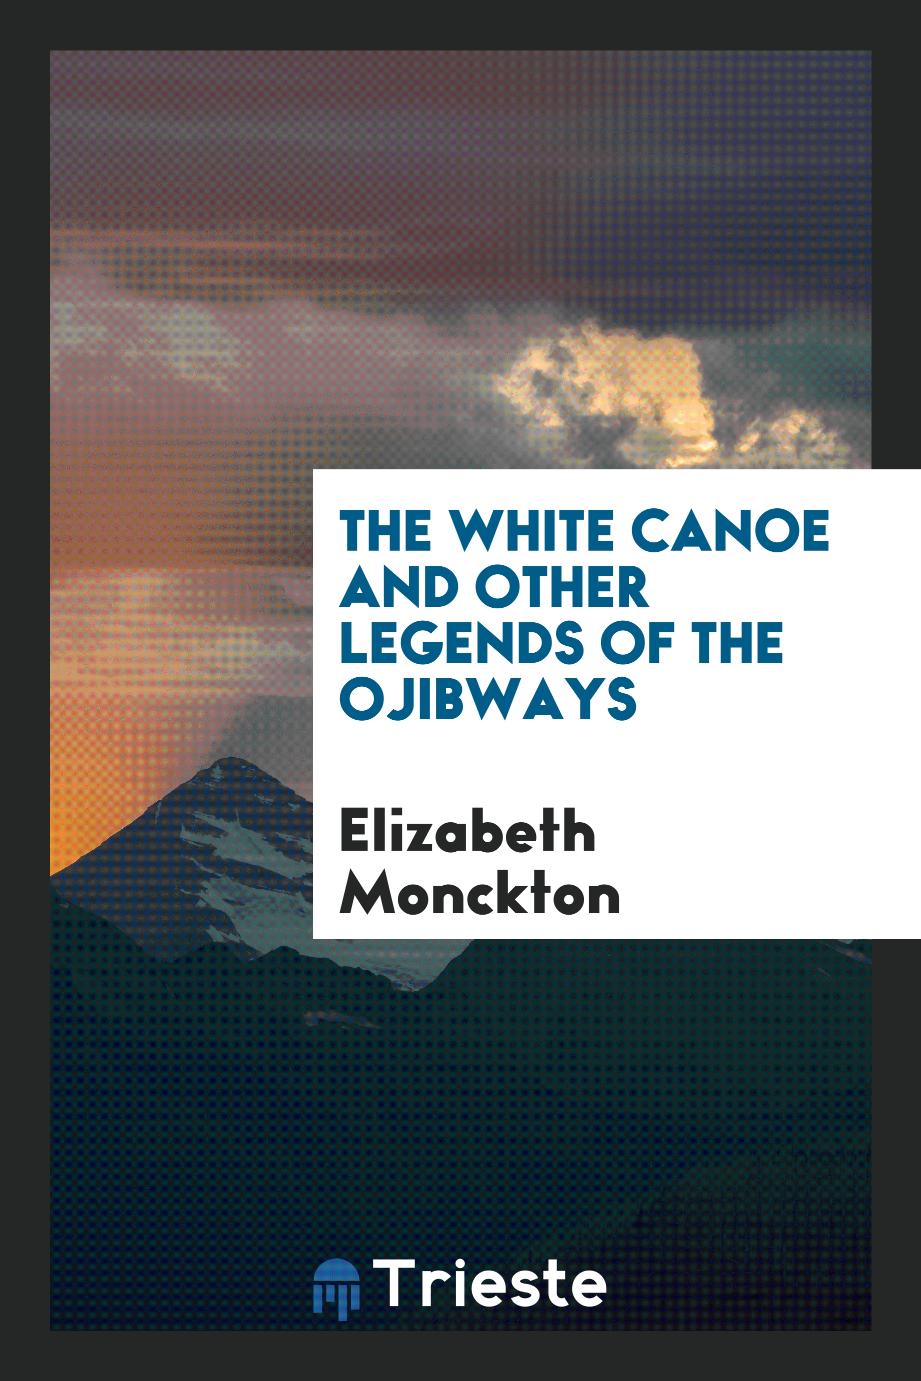 The white canoe and other legends of the Ojibways